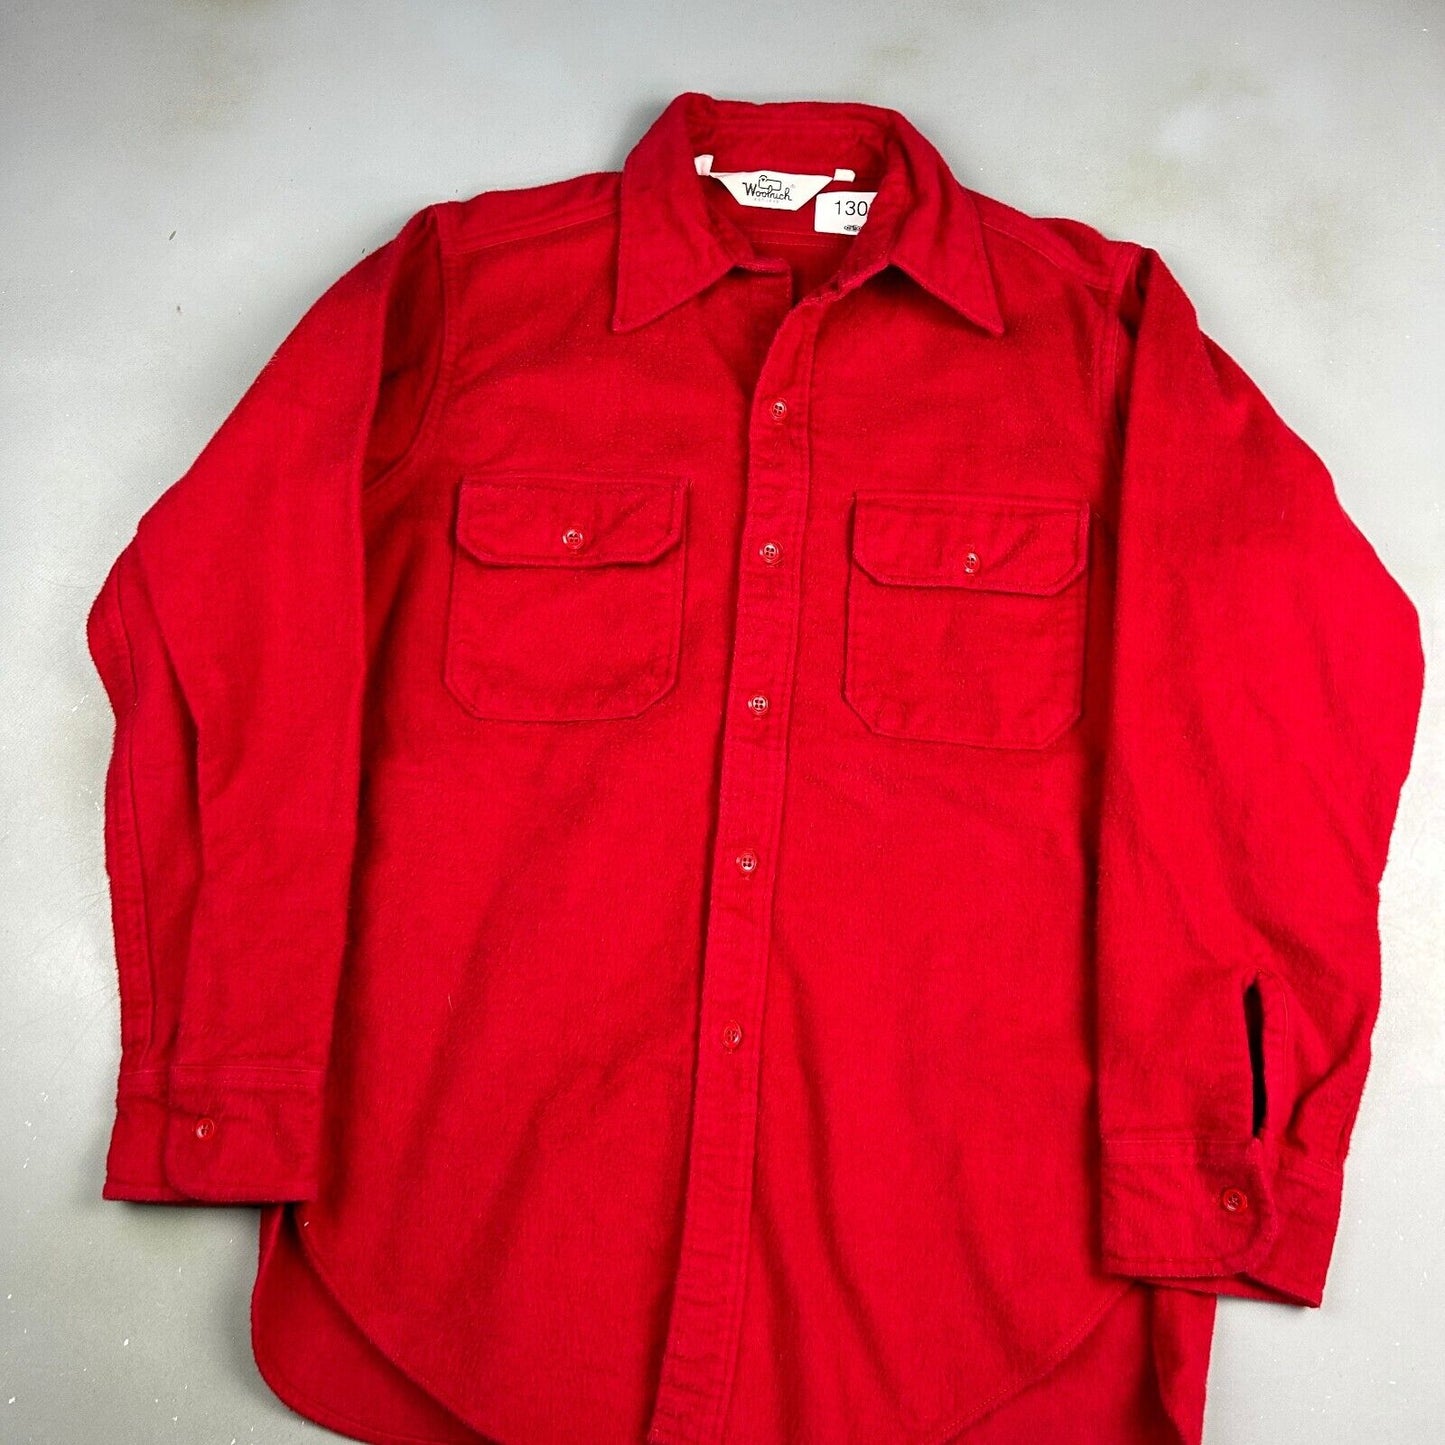 VINTAGE 90s Woolrich Red Cotton Cloth Button Up Shirt sz Large Adult